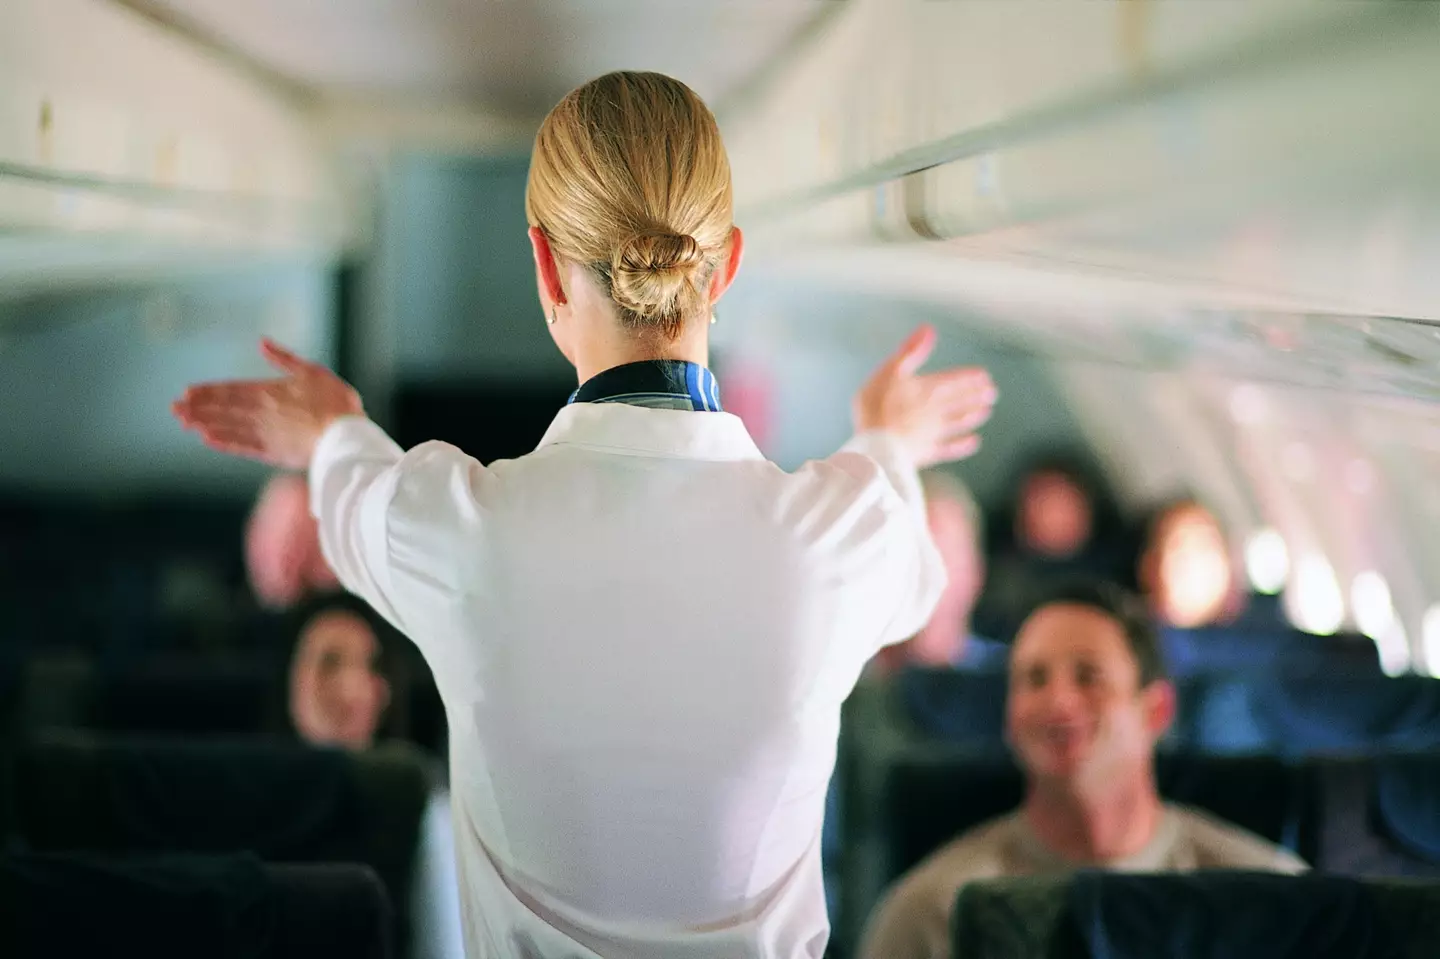 She's one of many flight attendants giving us the downlow on TikTok. (Getty Stock Image)